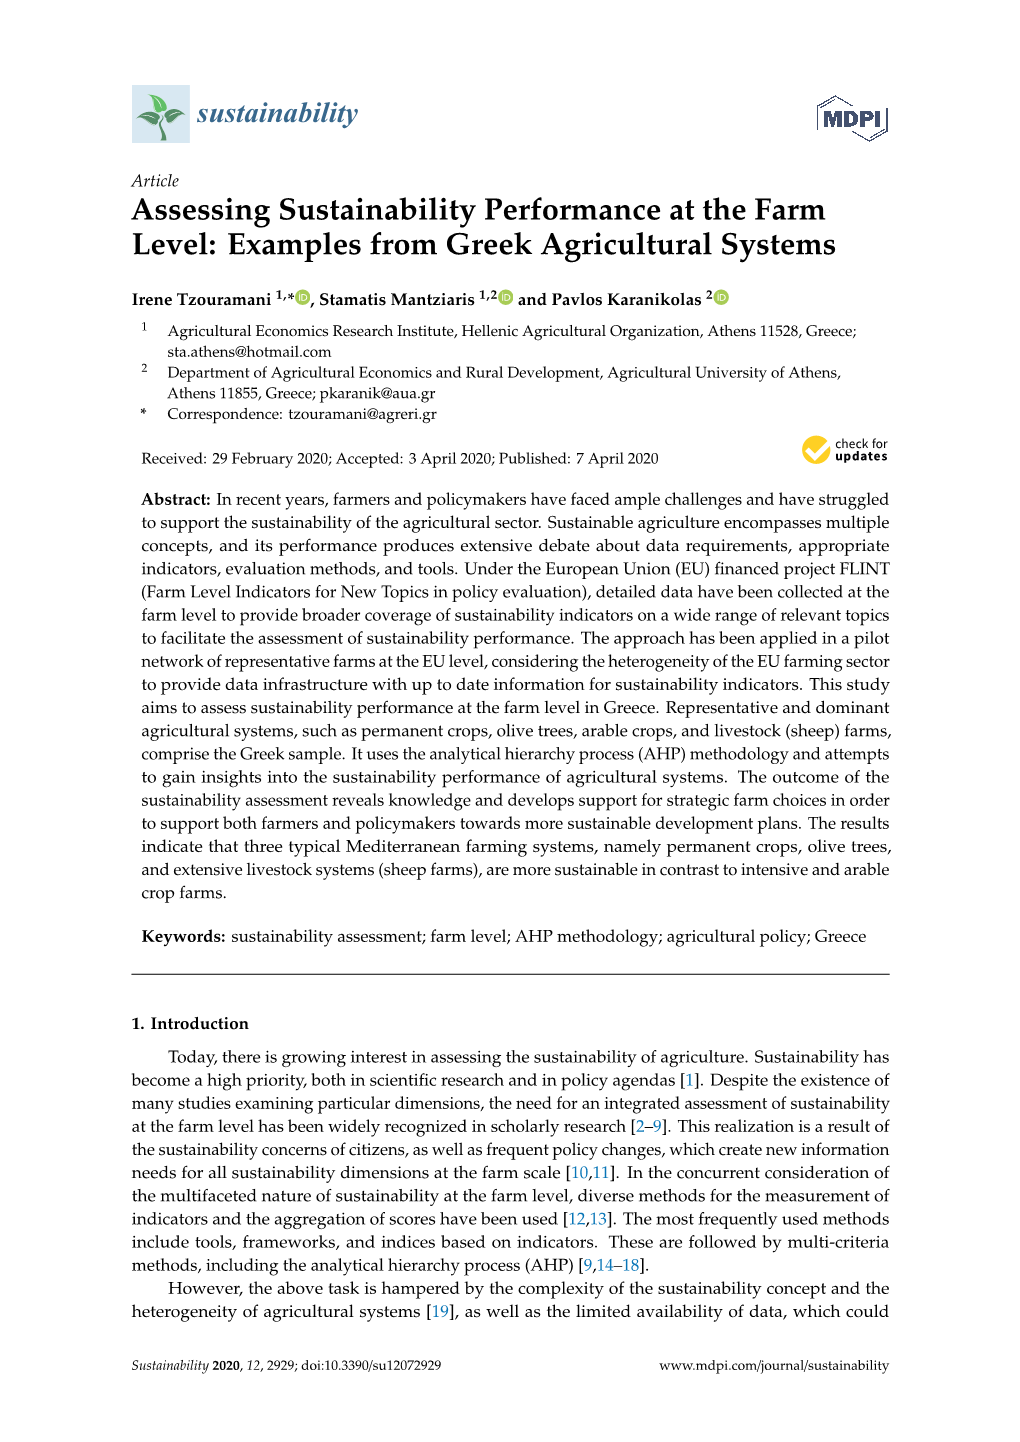 Assessing Sustainability Performance at the Farm Level: Examples from Greek Agricultural Systems